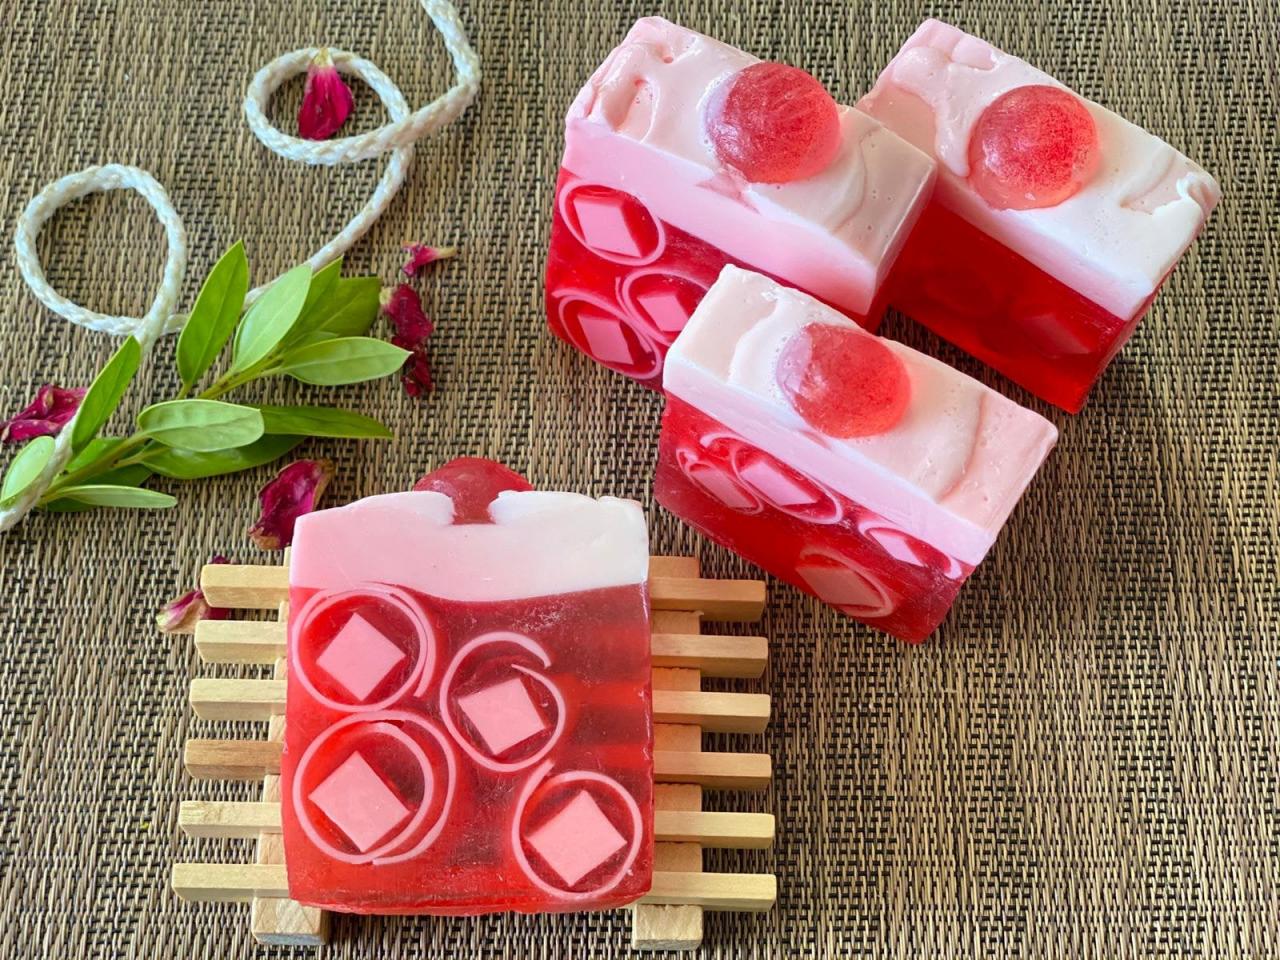 Handcrafted Natural Soap, Lovespell And Plumeria With Cherry Topping Soap, Artisan Soap